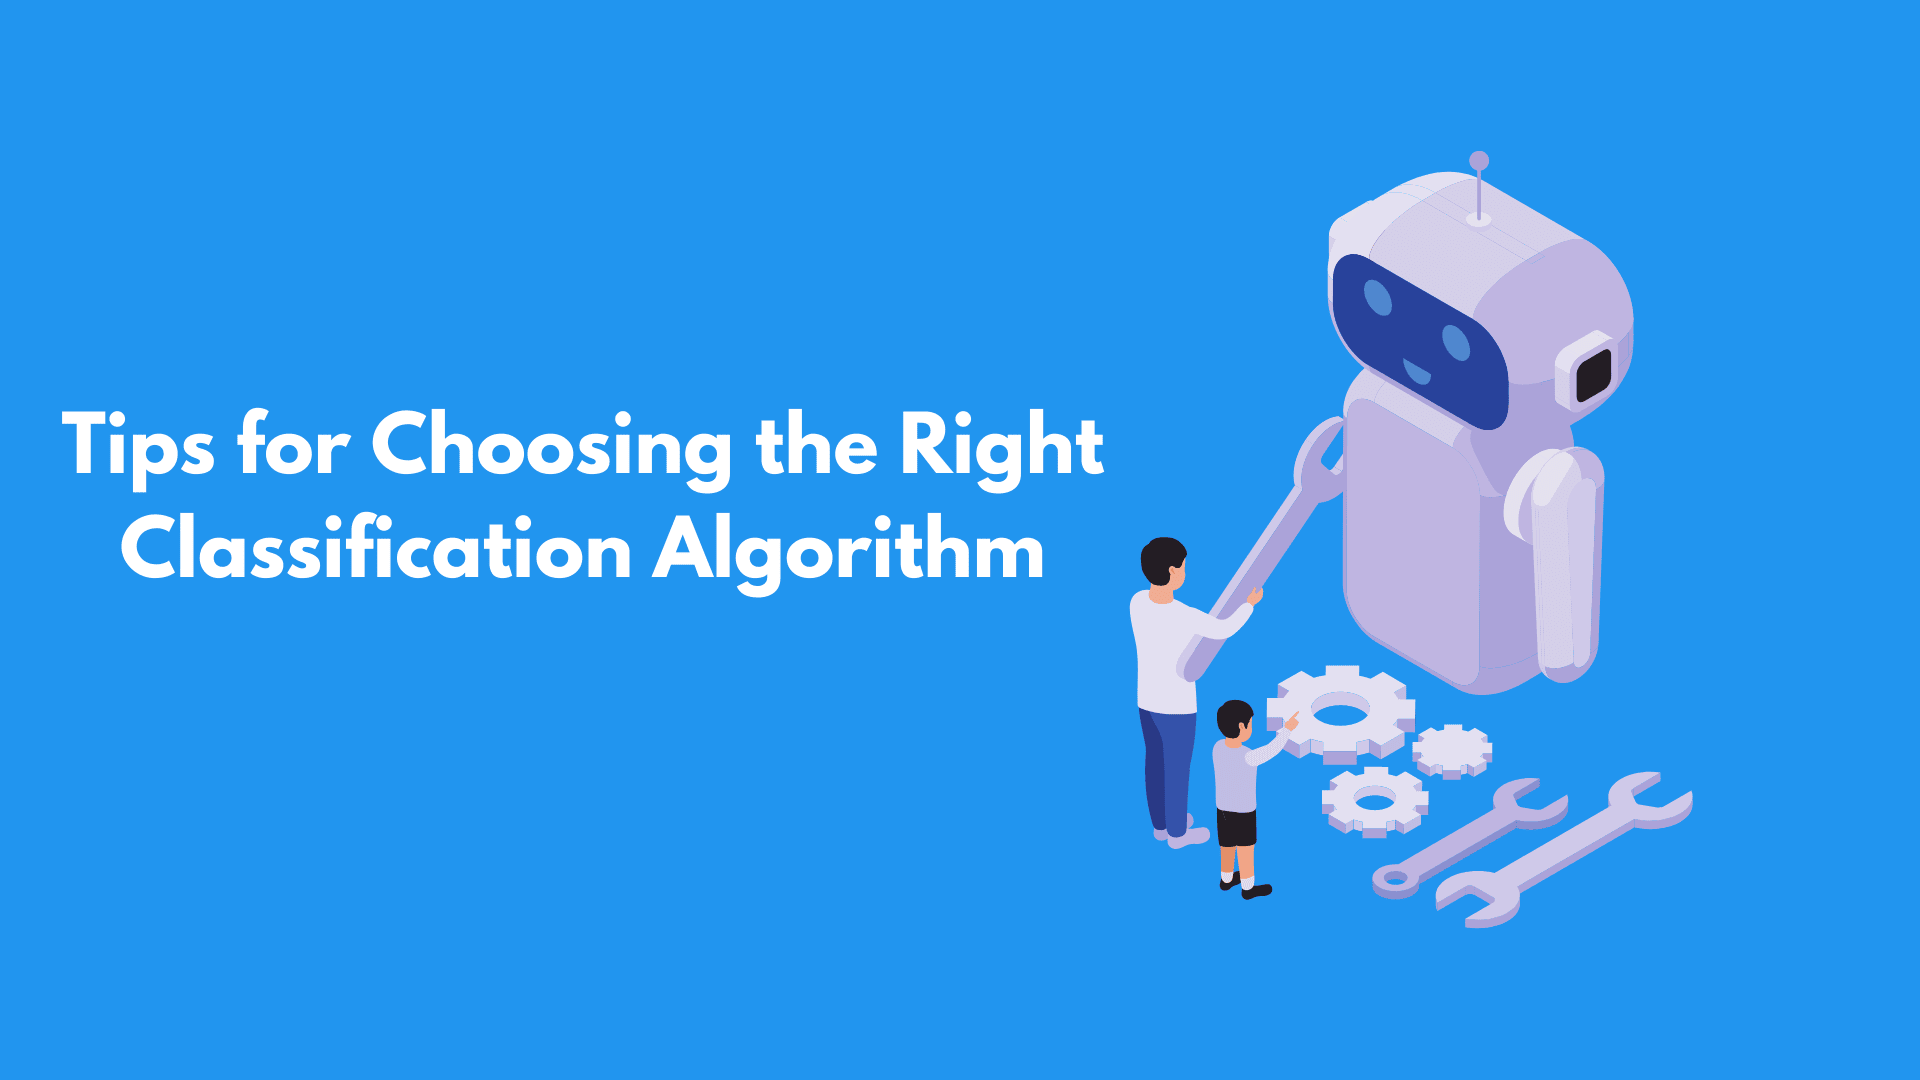 Tips for Choosing the Right Classification Algorithm